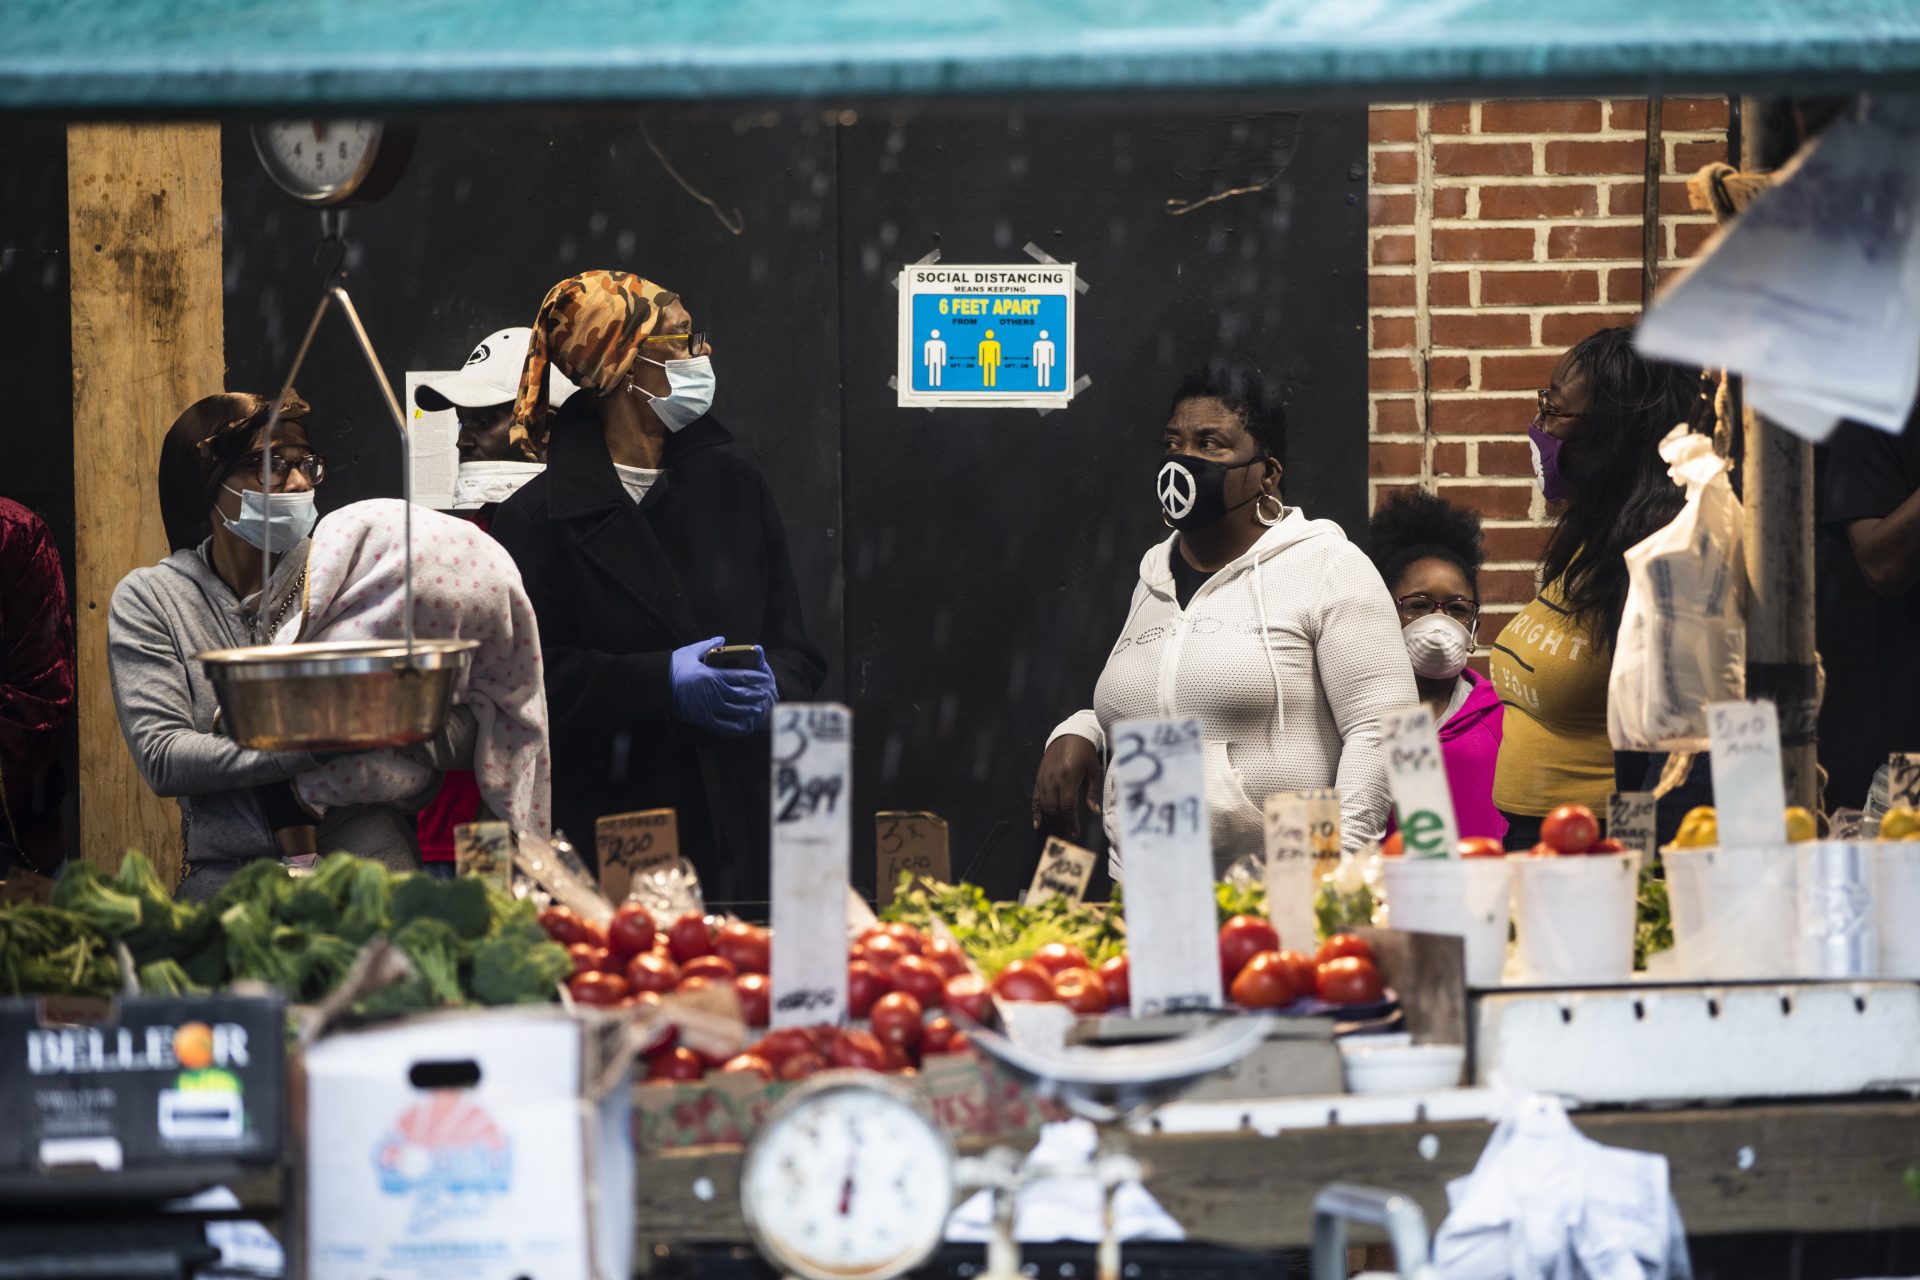 Shoppers wearing a face masks to protect against the spread of new coronavirus, wait in line to enter a store on South 9th Street in Italian Market neighborhood of Philadelphia as it rains, Thursday, April 9, 2020.